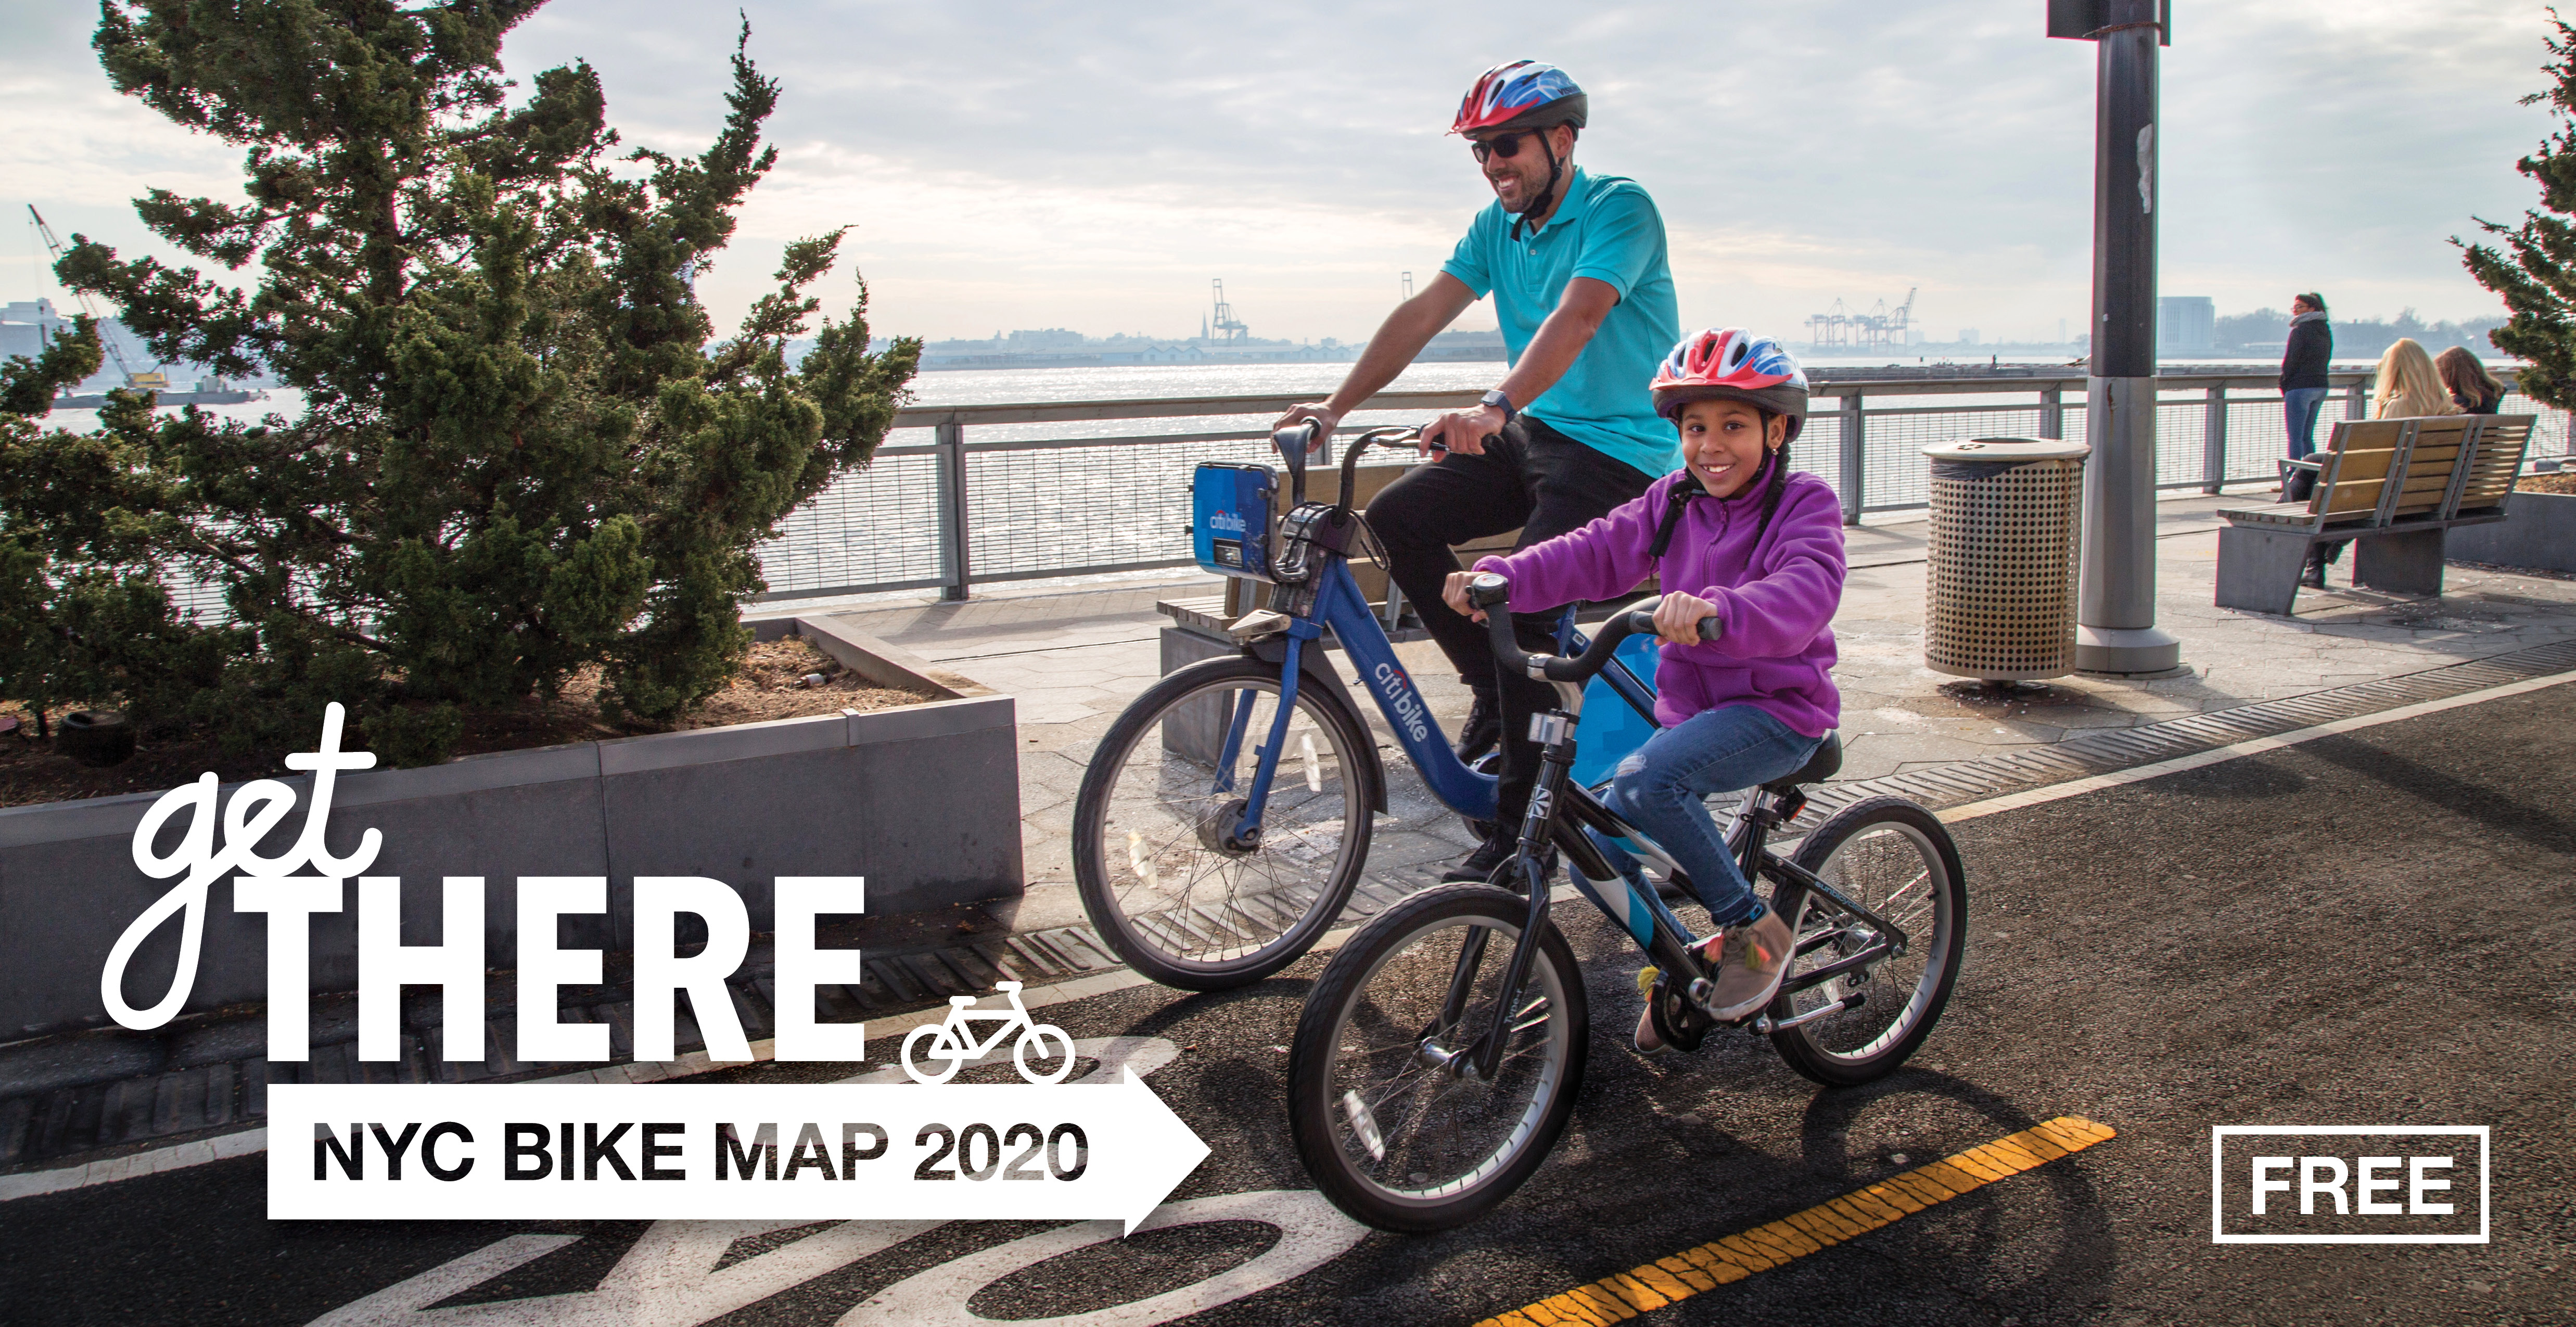 The 2020 bike map, showing an adult on a Citi Bike and their young child riding a regular bike.